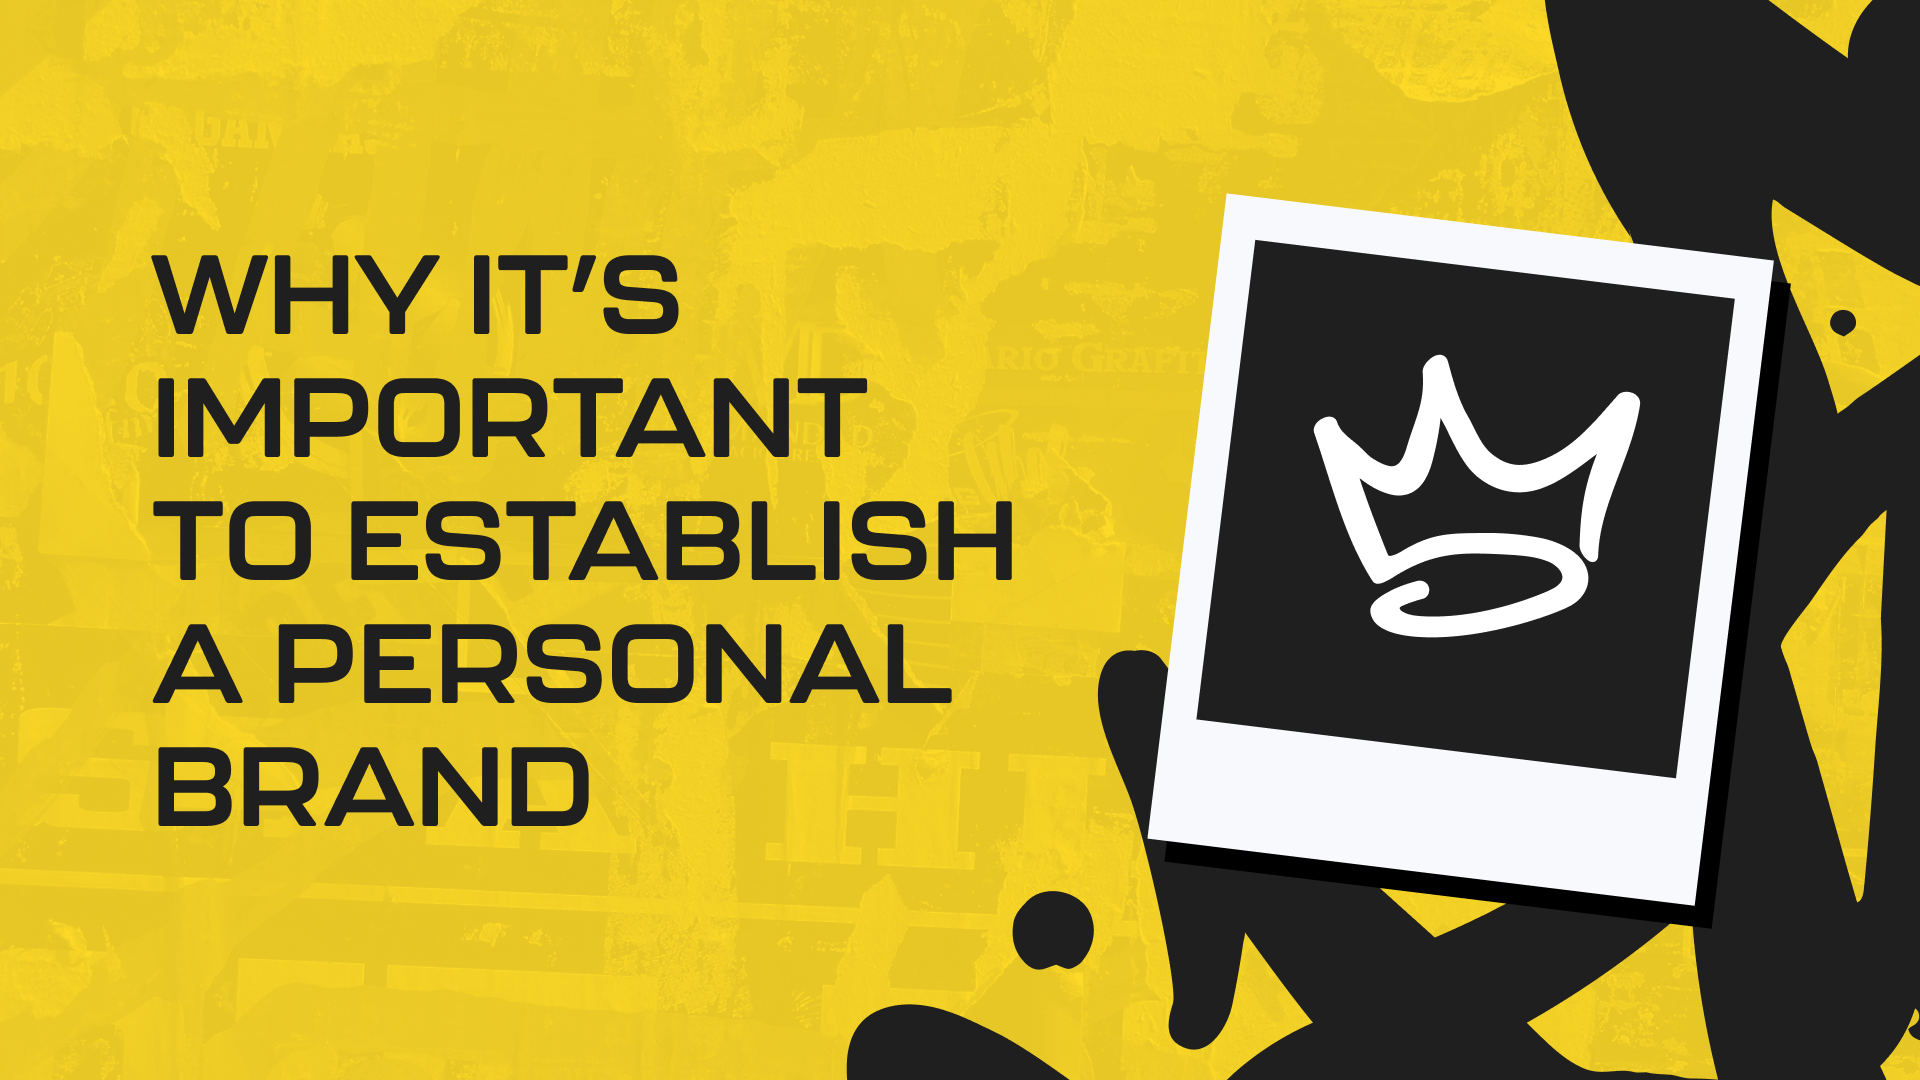 Why it’s Important to Establish a Personal Brand